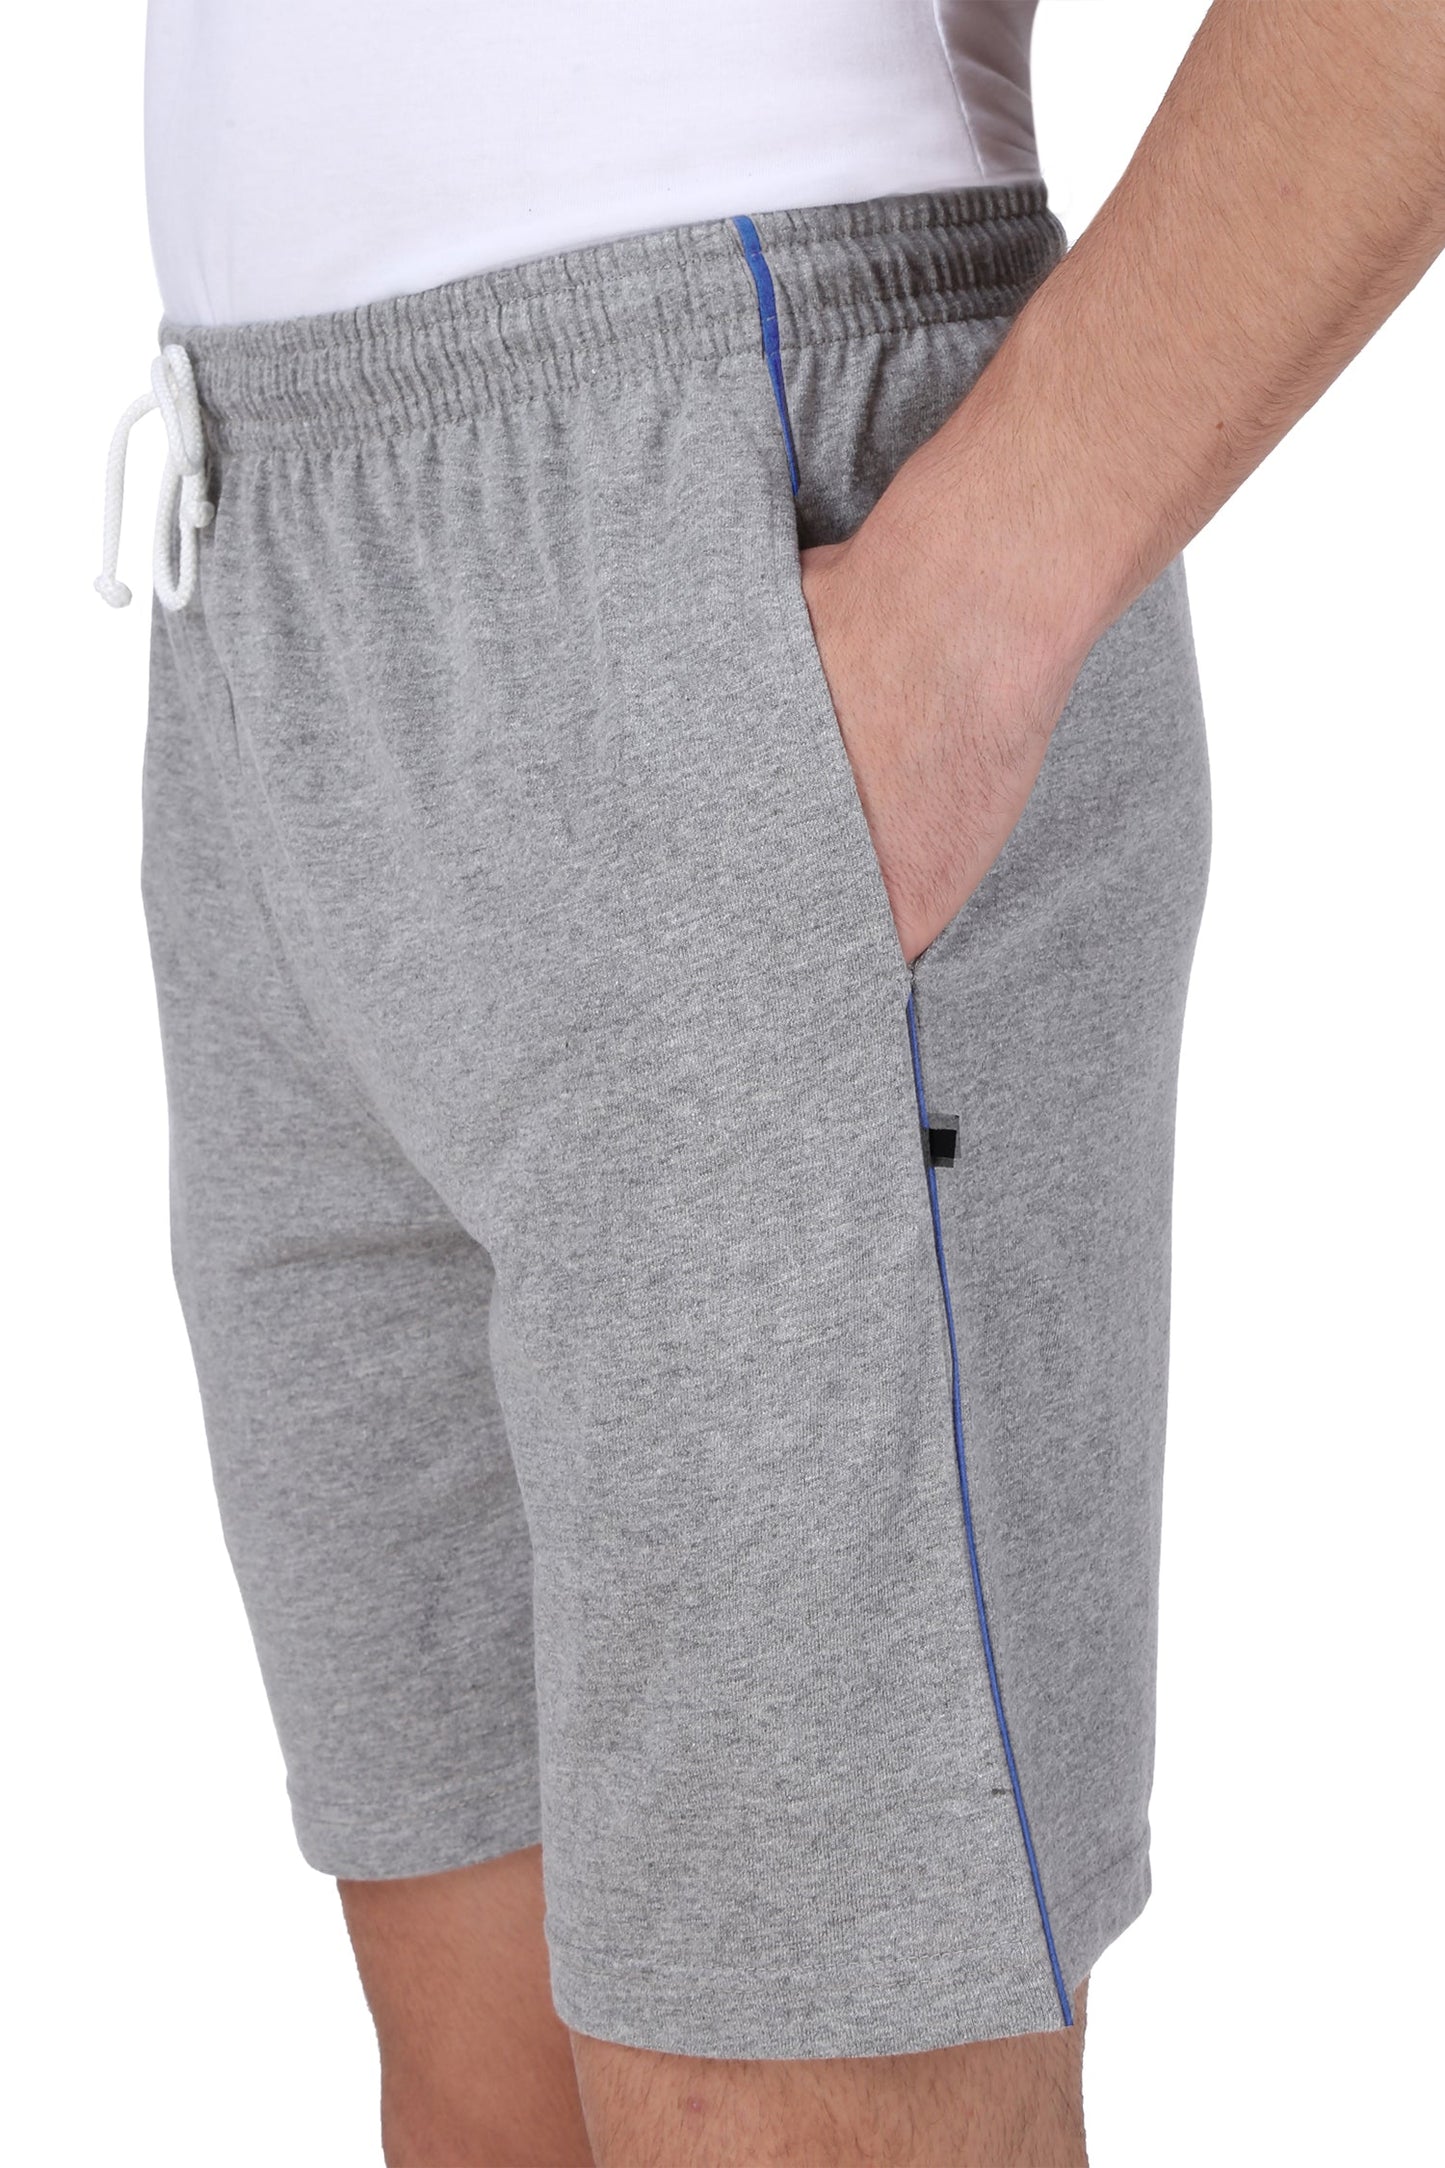 NEO GARMENTS Men’s Cotton Long Shorts | GREY | SIZES FROM M TO 9XL.